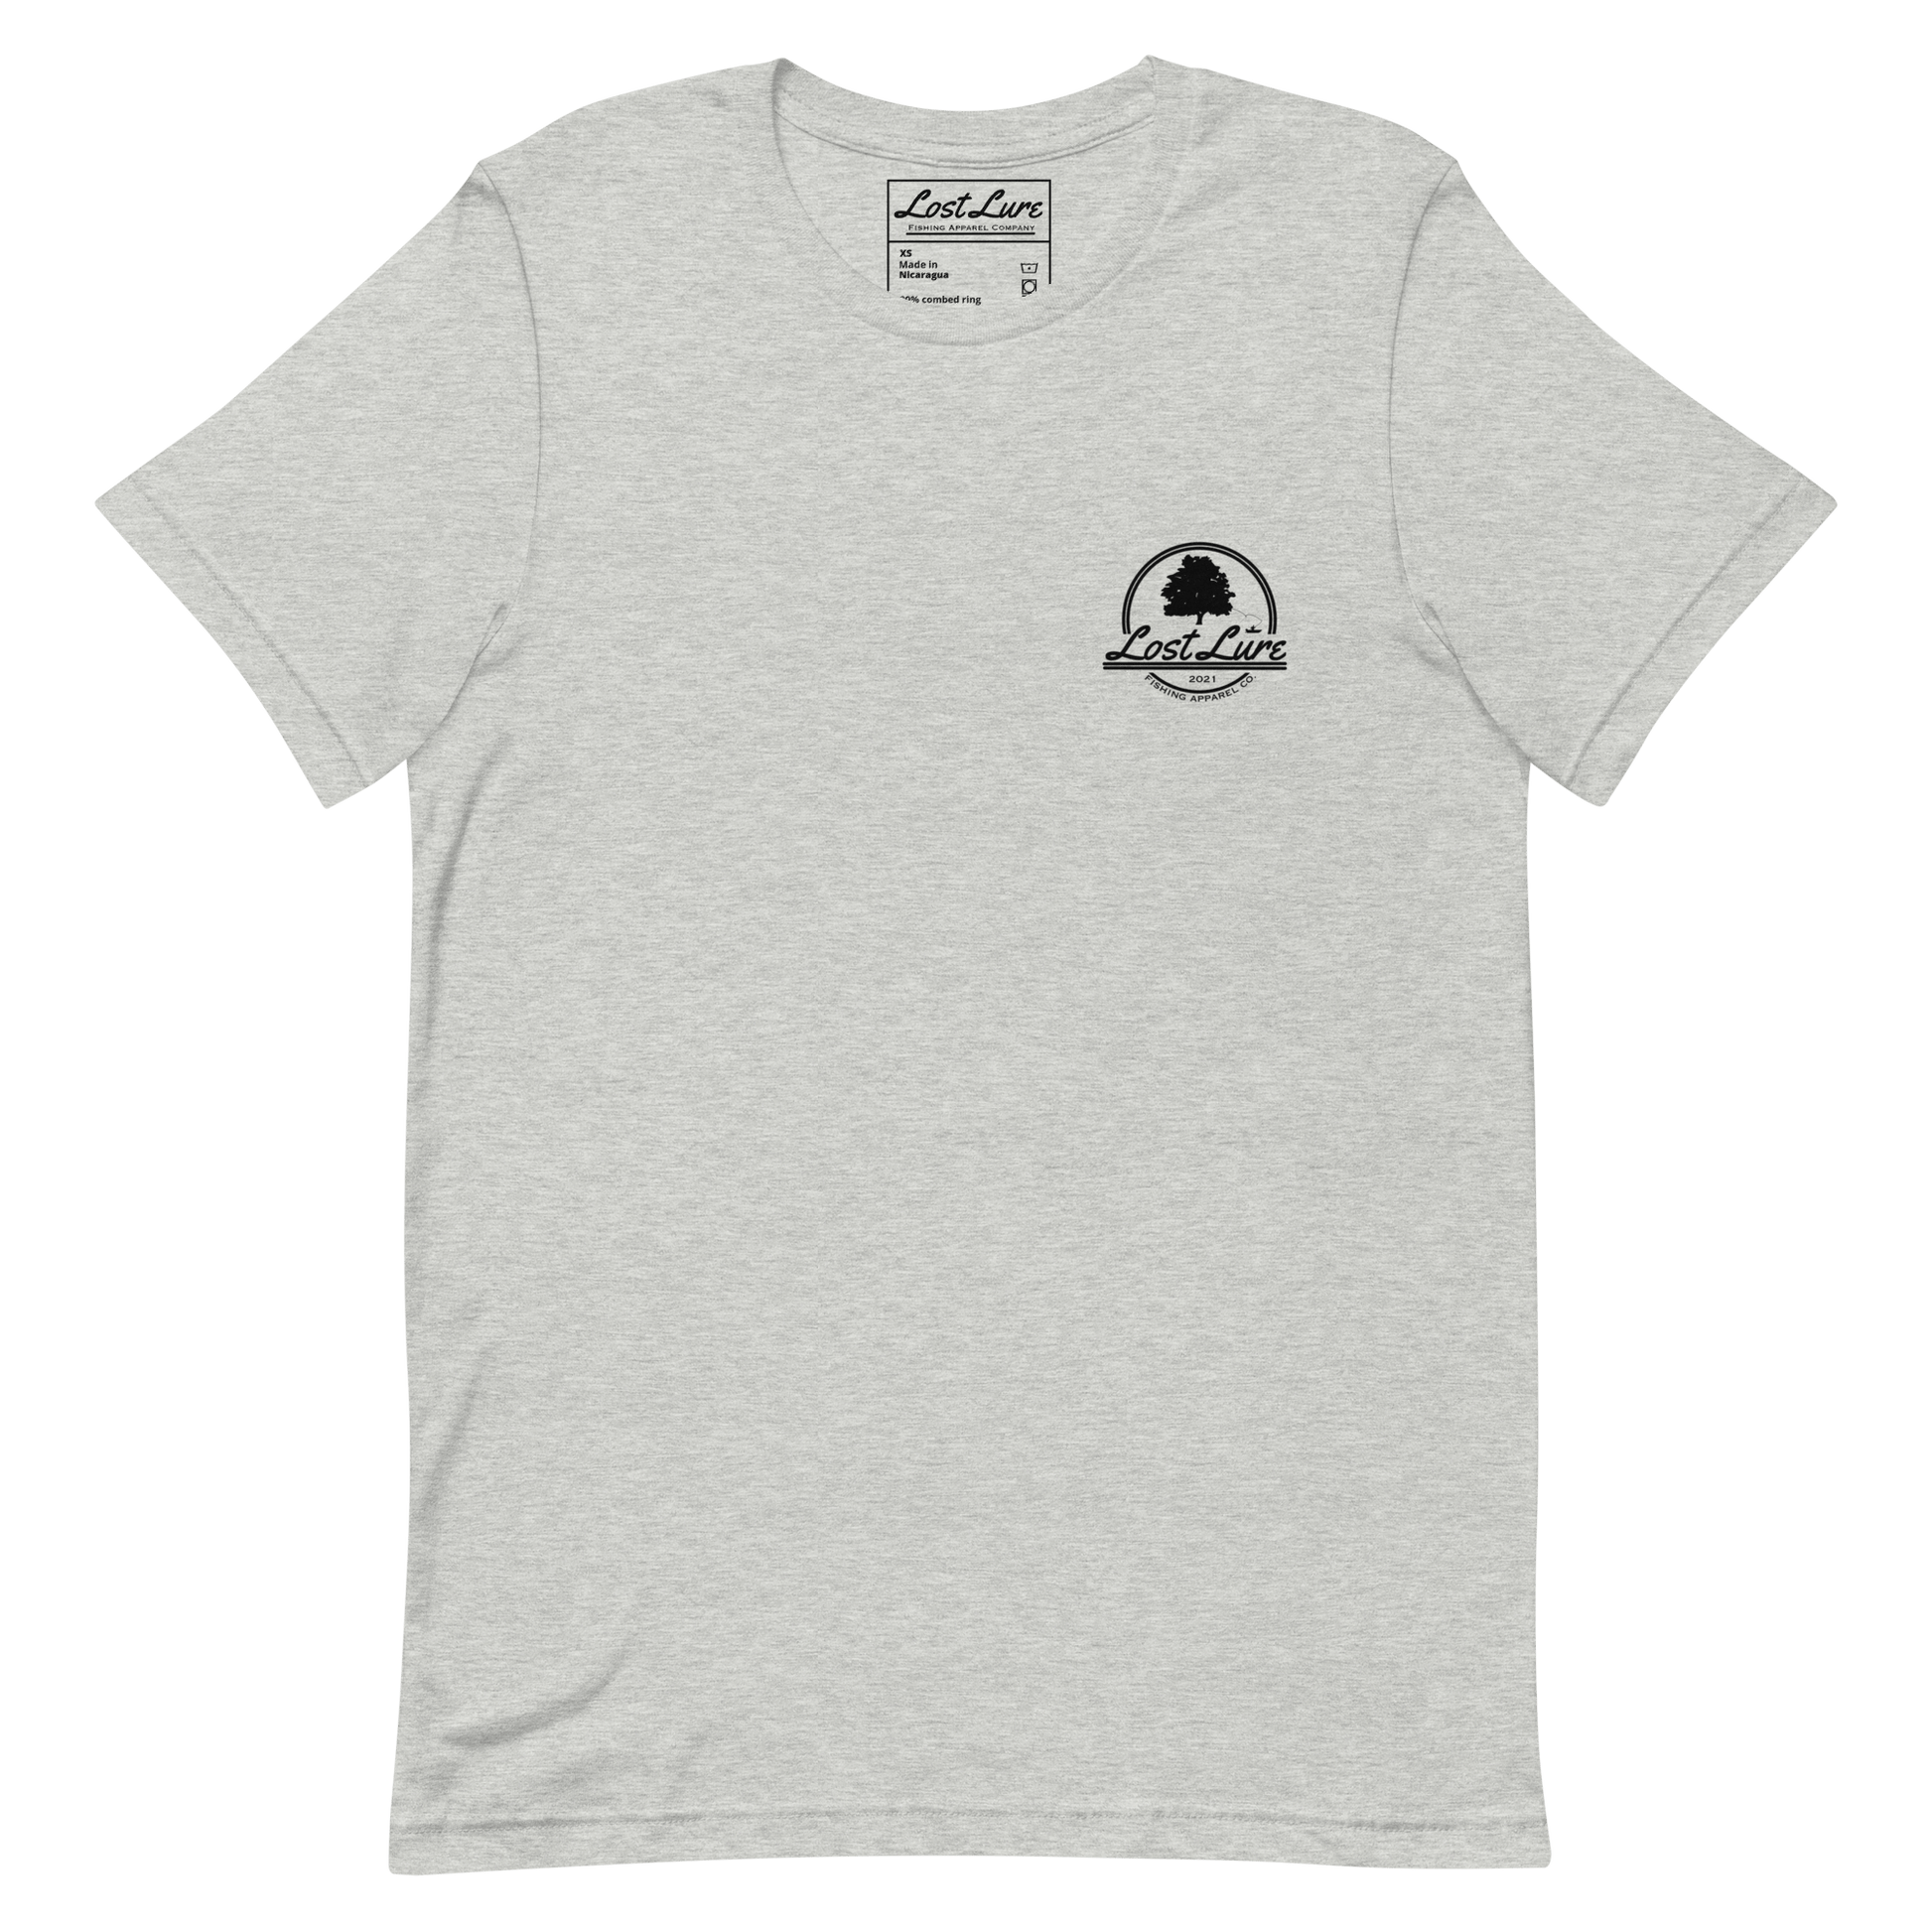 Bass fishing shirt. It has a drawing of a fat bass and it reads “lost lure co, catch fat fish”. The bass design is on the back, the lost lure logo is on the front. Light gray shirt, front side 